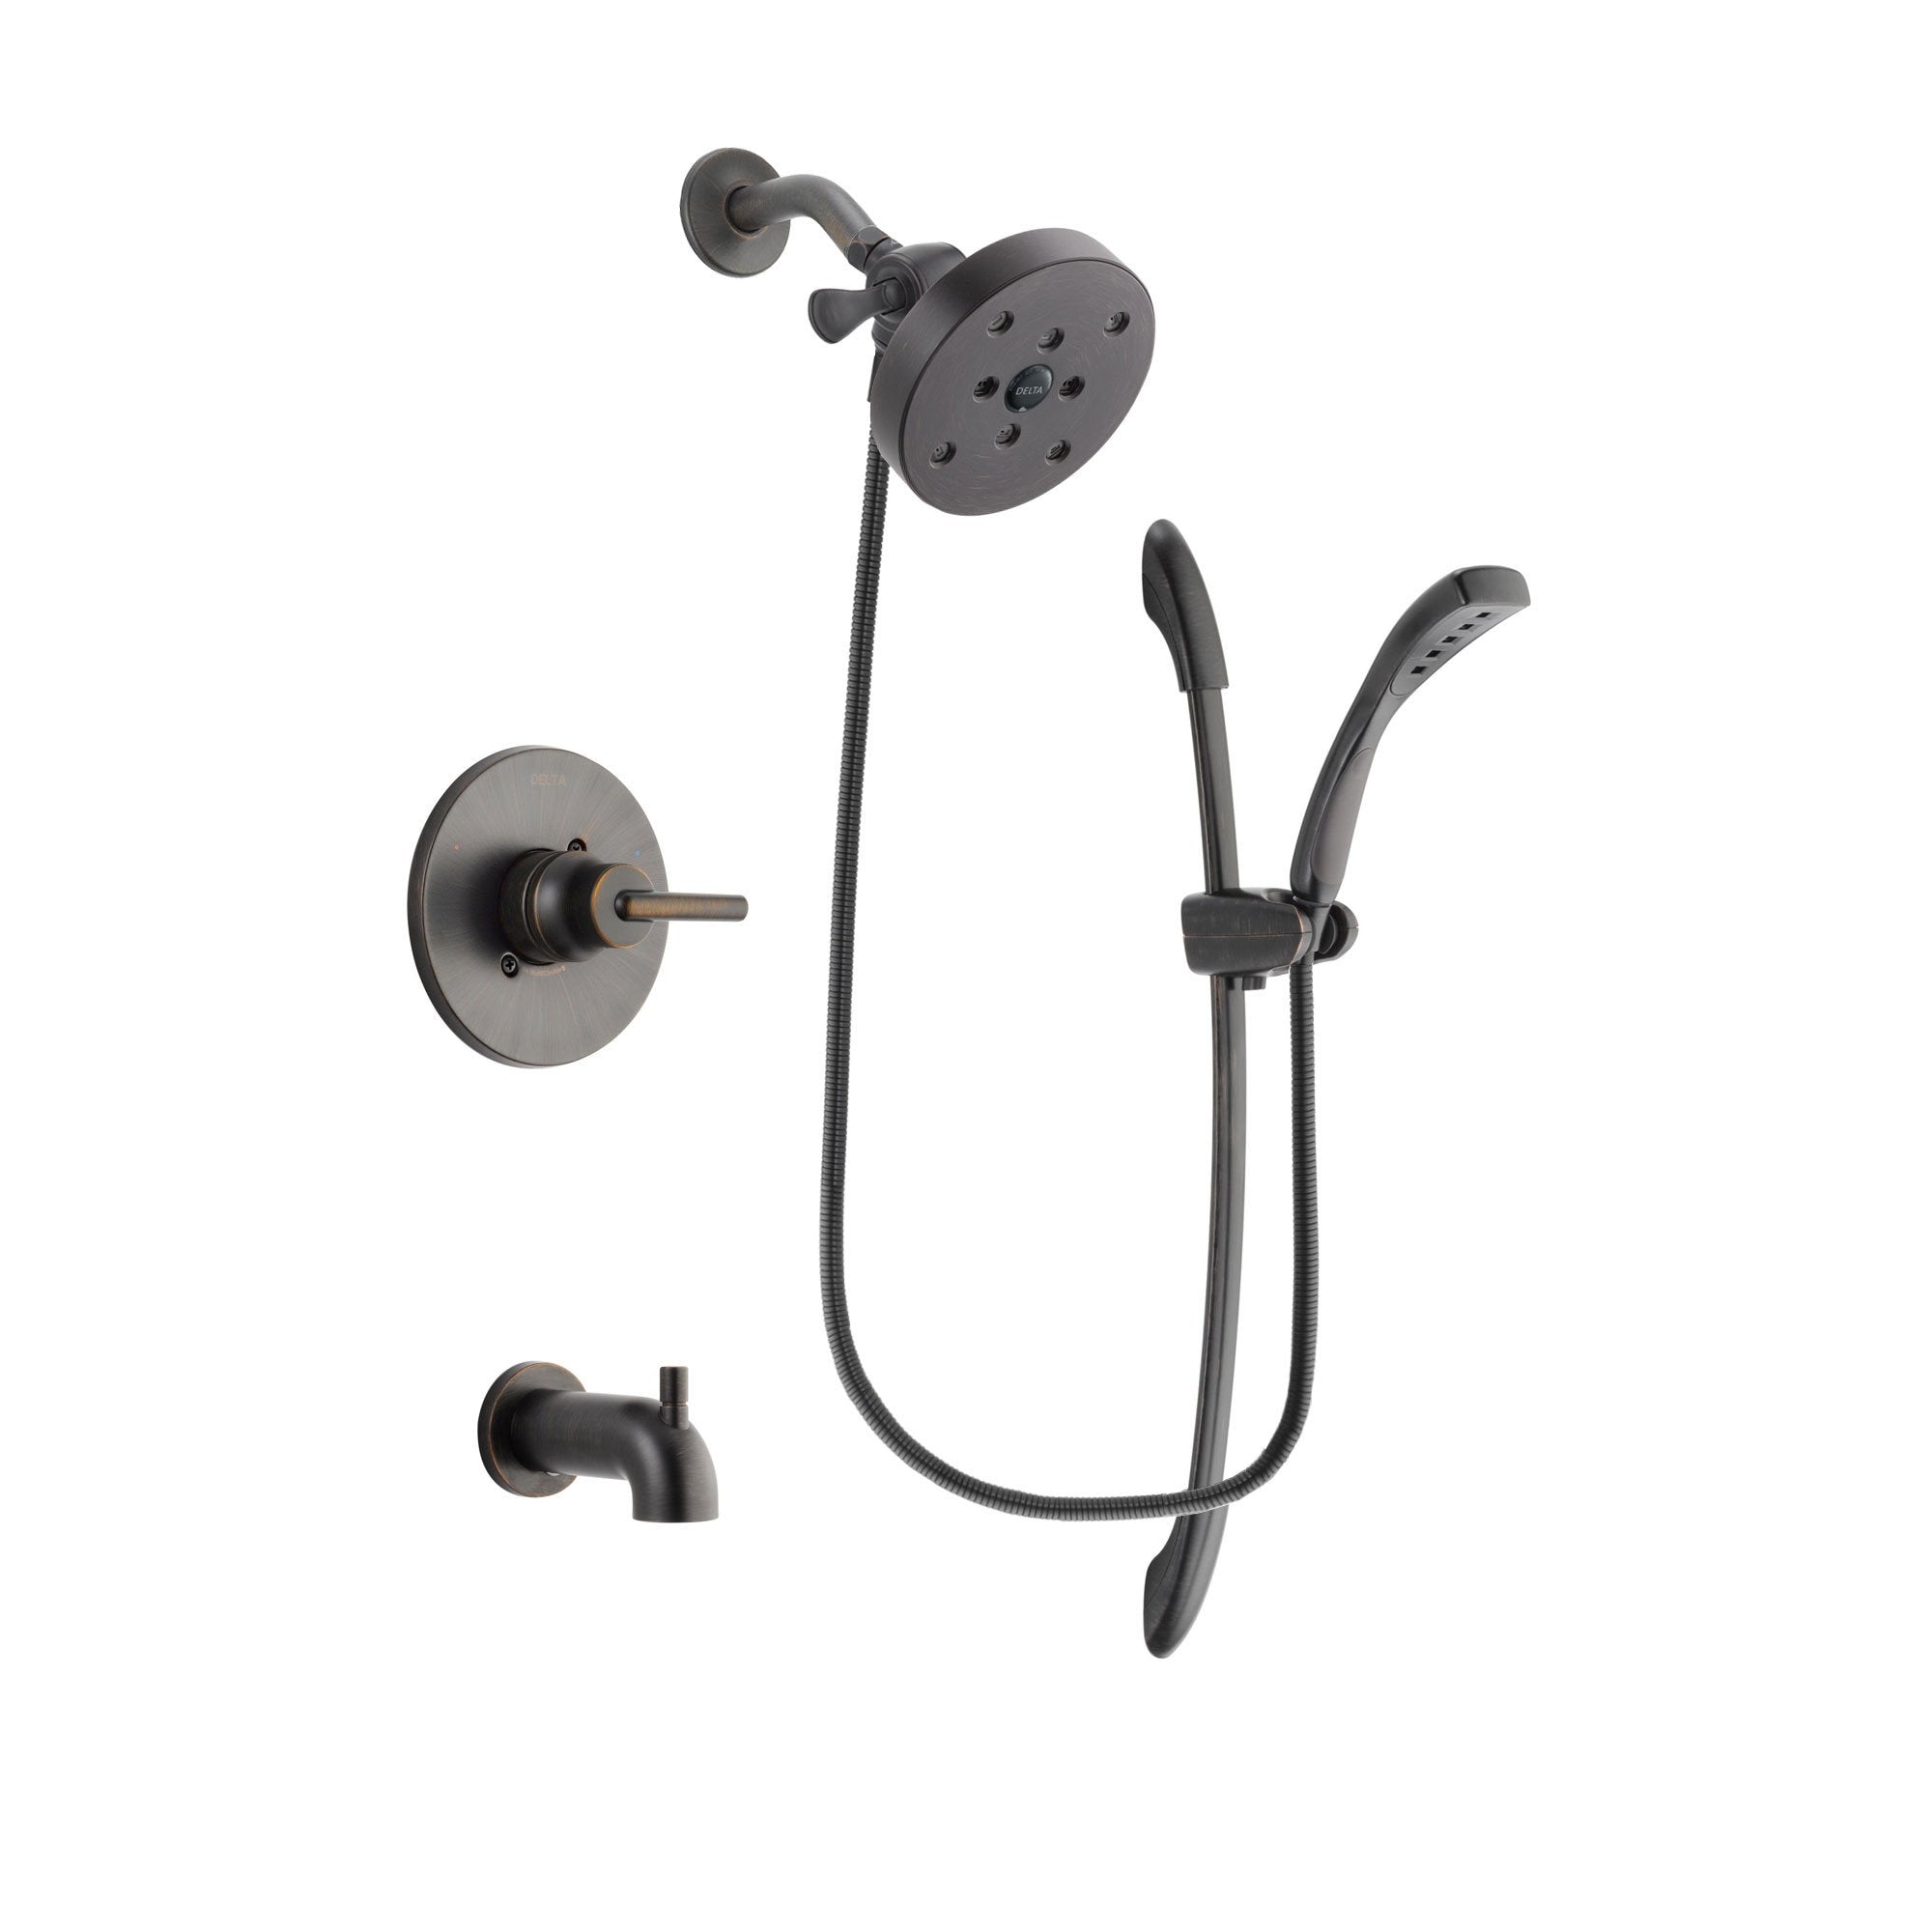 Delta Trinsic Venetian Bronze Finish Tub and Shower Faucet System Package with 5-1/2 inch Showerhead and 1-Spray Handshower with Slide Bar Includes Rough-in Valve and Tub Spout DSP2483V